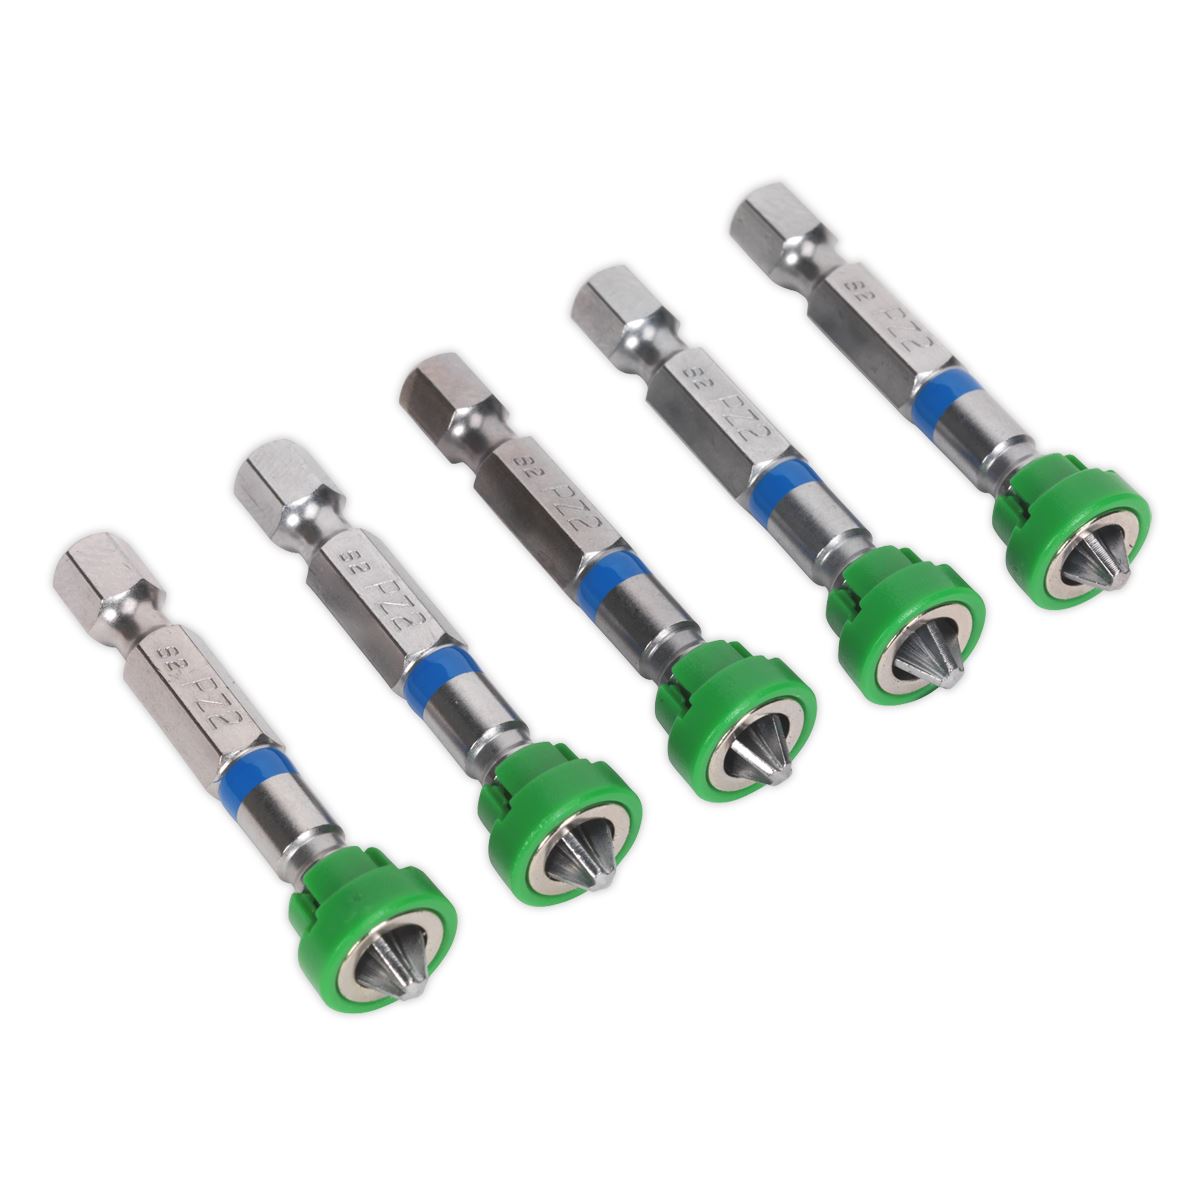 Sealey Screwdriver Bits 5 Pack S2 Steel with Magnetic Holder Pozi Phillips